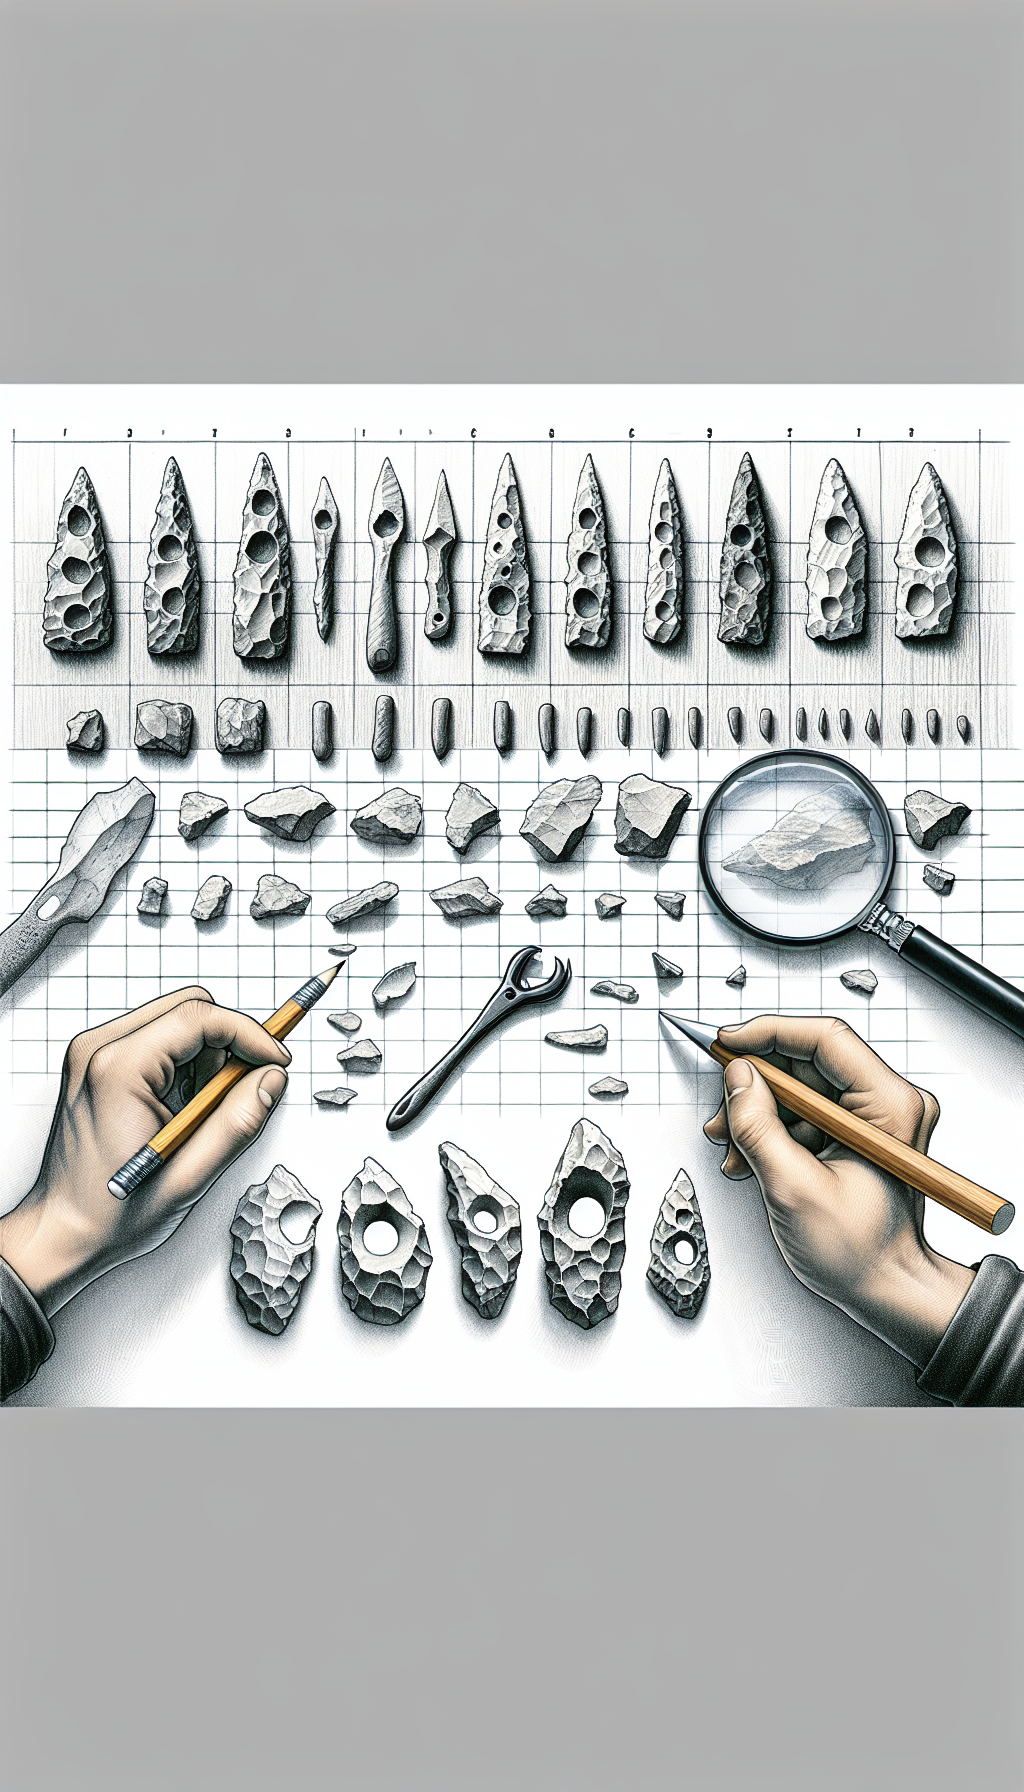 An illustration shows an aged flintknapper's workbench as a timeline, with translucent layers representing different eras, where his tools fade into modern hands examining artifacts with a magnifying glass. Stone chips scatter across the eras, morphing into labeled, recognizable tools beneath a grid, blending pencil-sketch realism with digital overlays highlighting the key identification features of the stone artifacts.